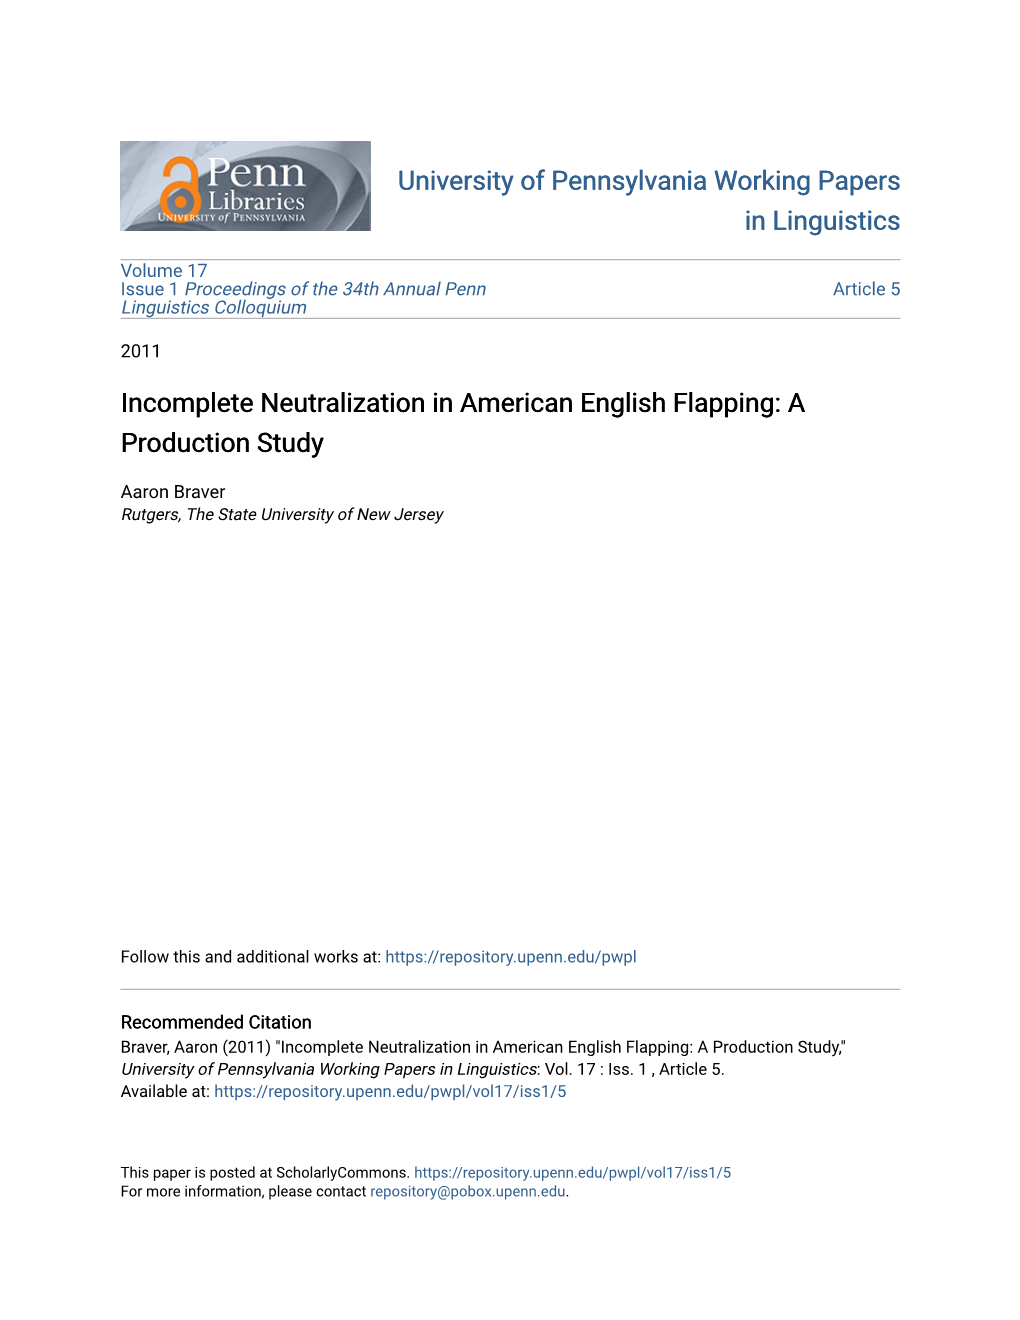 Incomplete Neutralization in American English Flapping: a Production Study